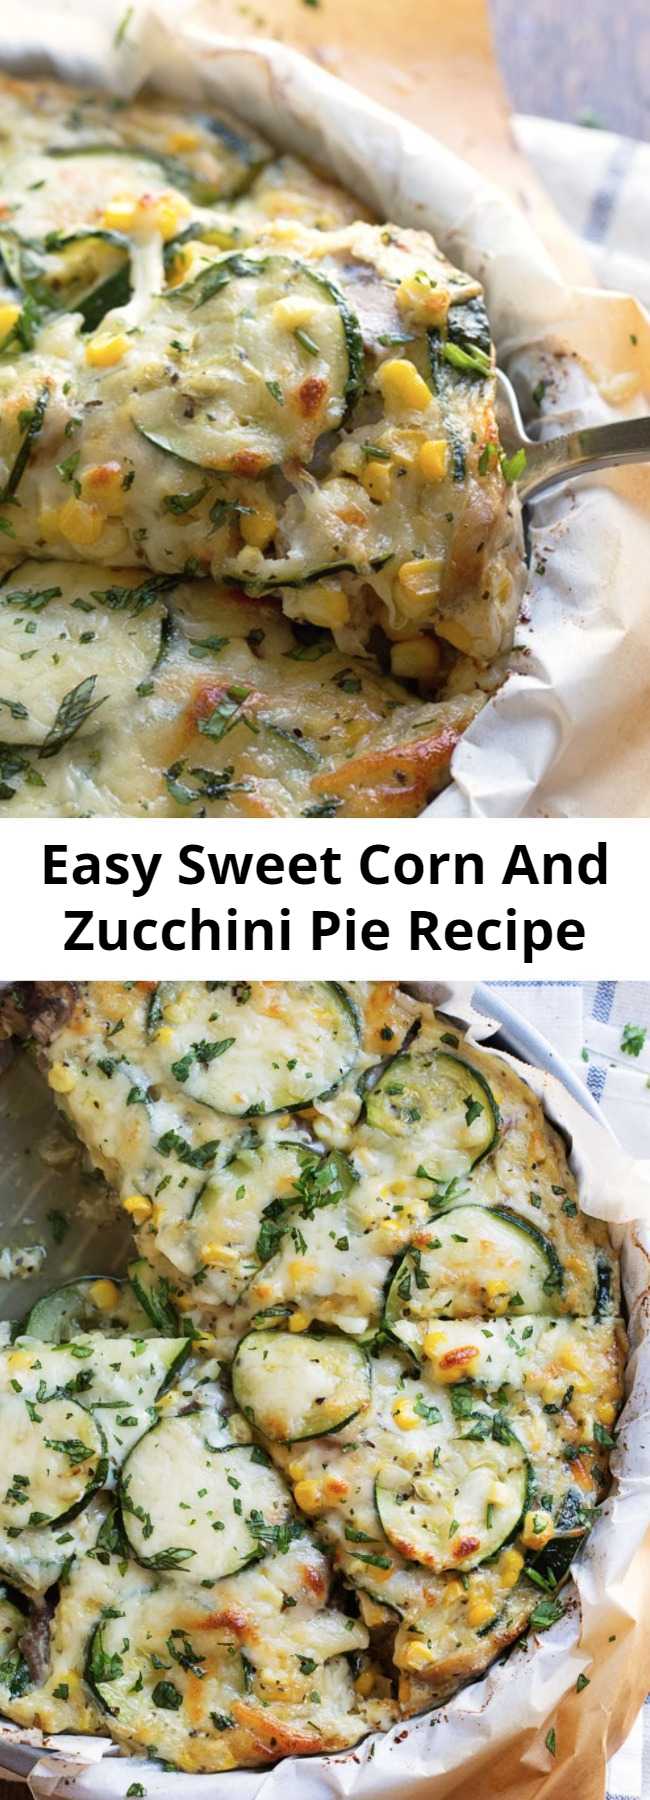 Easy Sweet Corn And Zucchini Pie Recipe - This crustless Sweet Corn and Zucchini Pie is so incredibly simple to make and it’s the perfect way to enjoy summer produce! #corn #zucchini #summer #pie #cheese